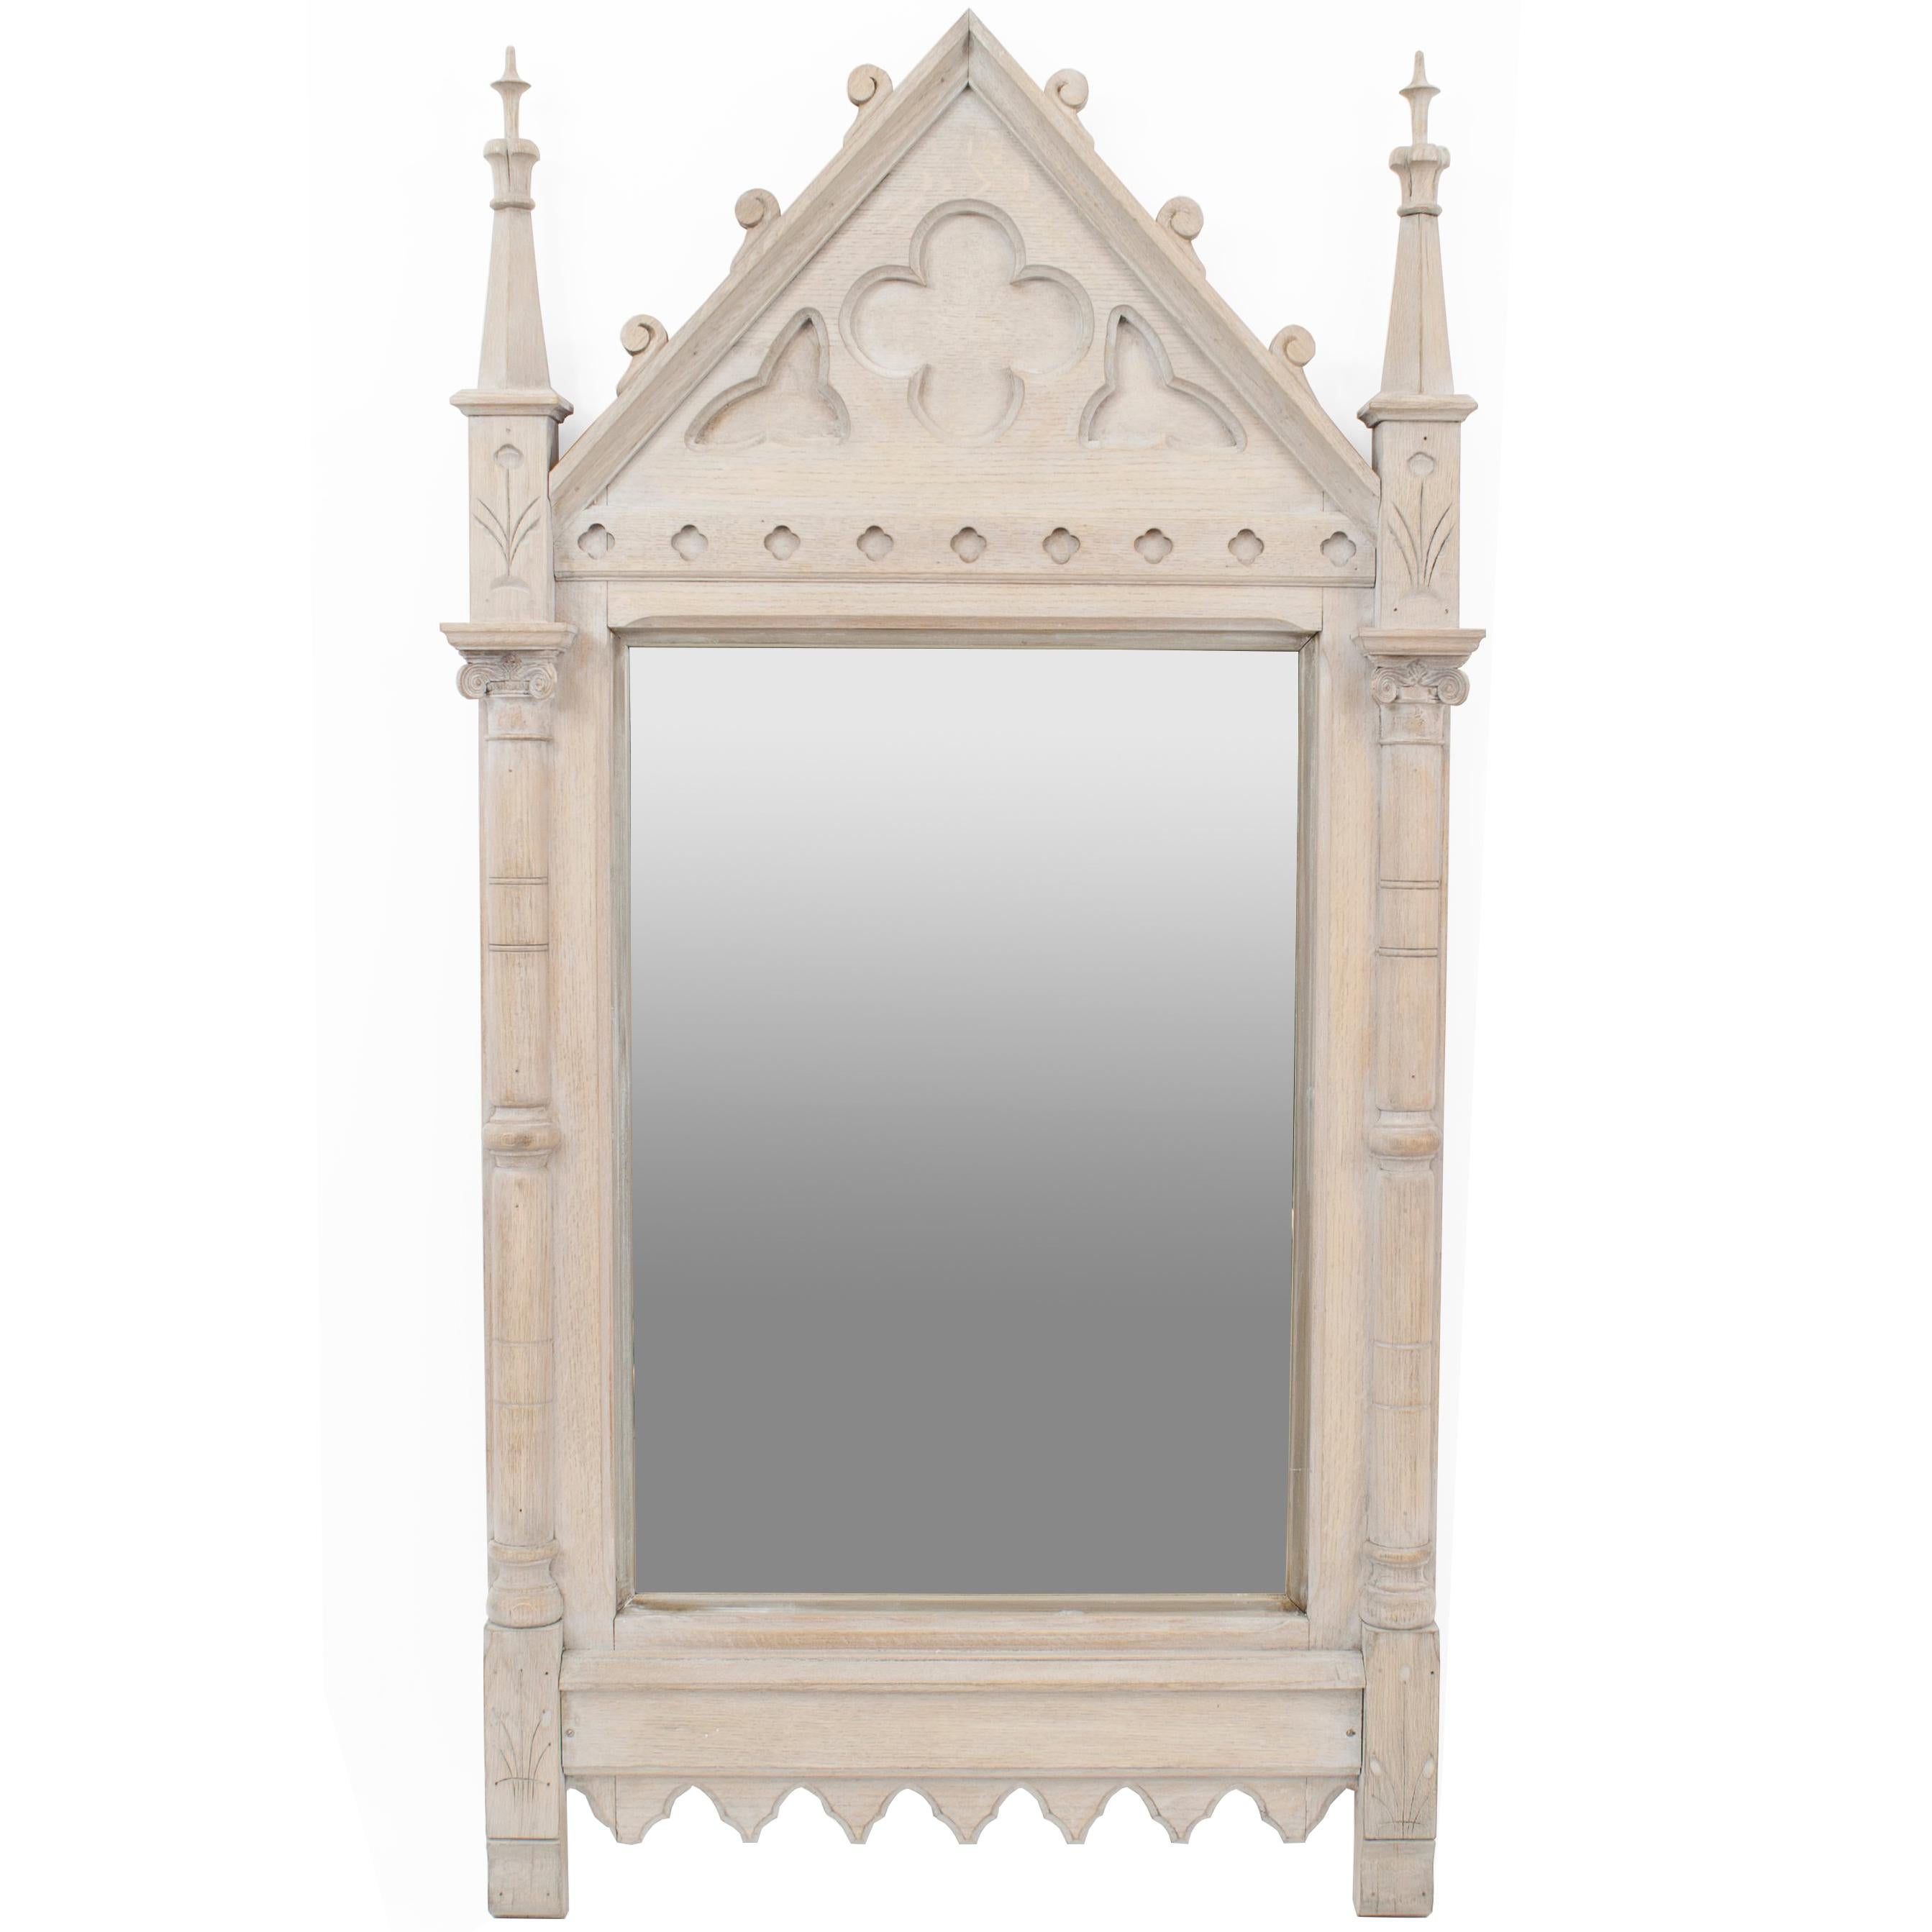 English Gothic Revival 'Late 19th Century' Bleached Oak Wall Mirror For Sale